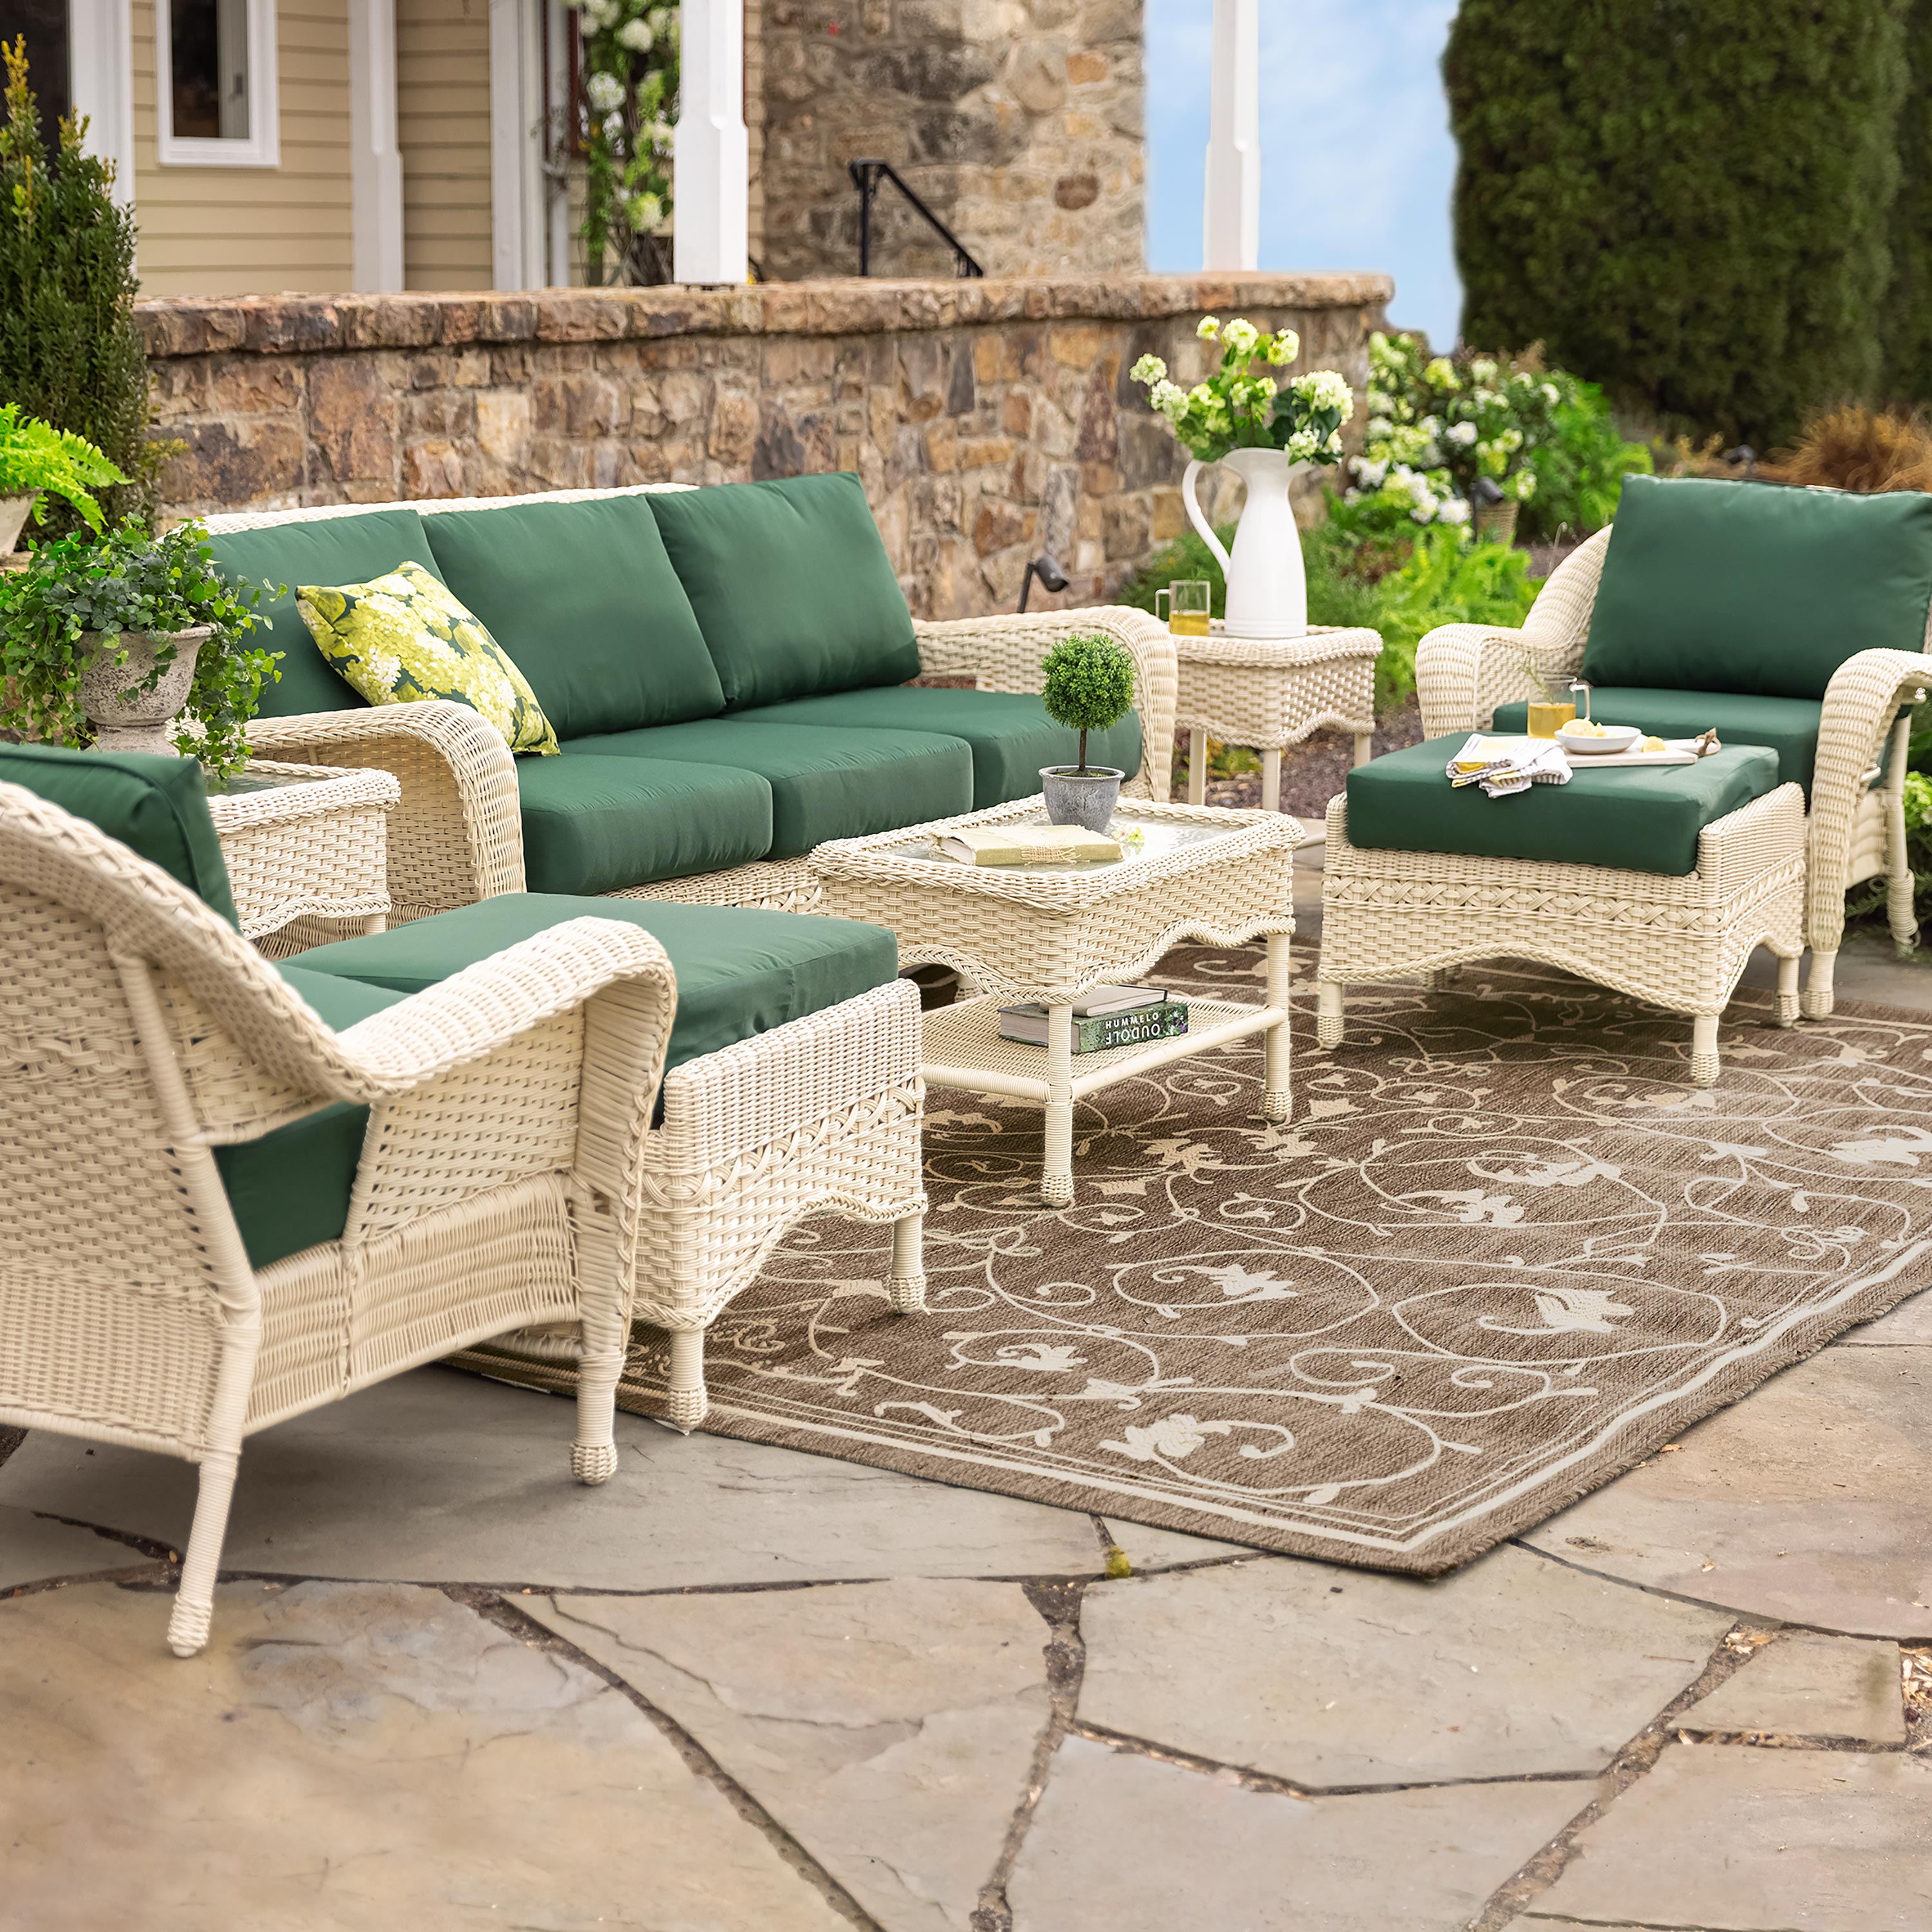 Prospect Hill Outdoor Wicker Deep Seating Ottoman with Cushion